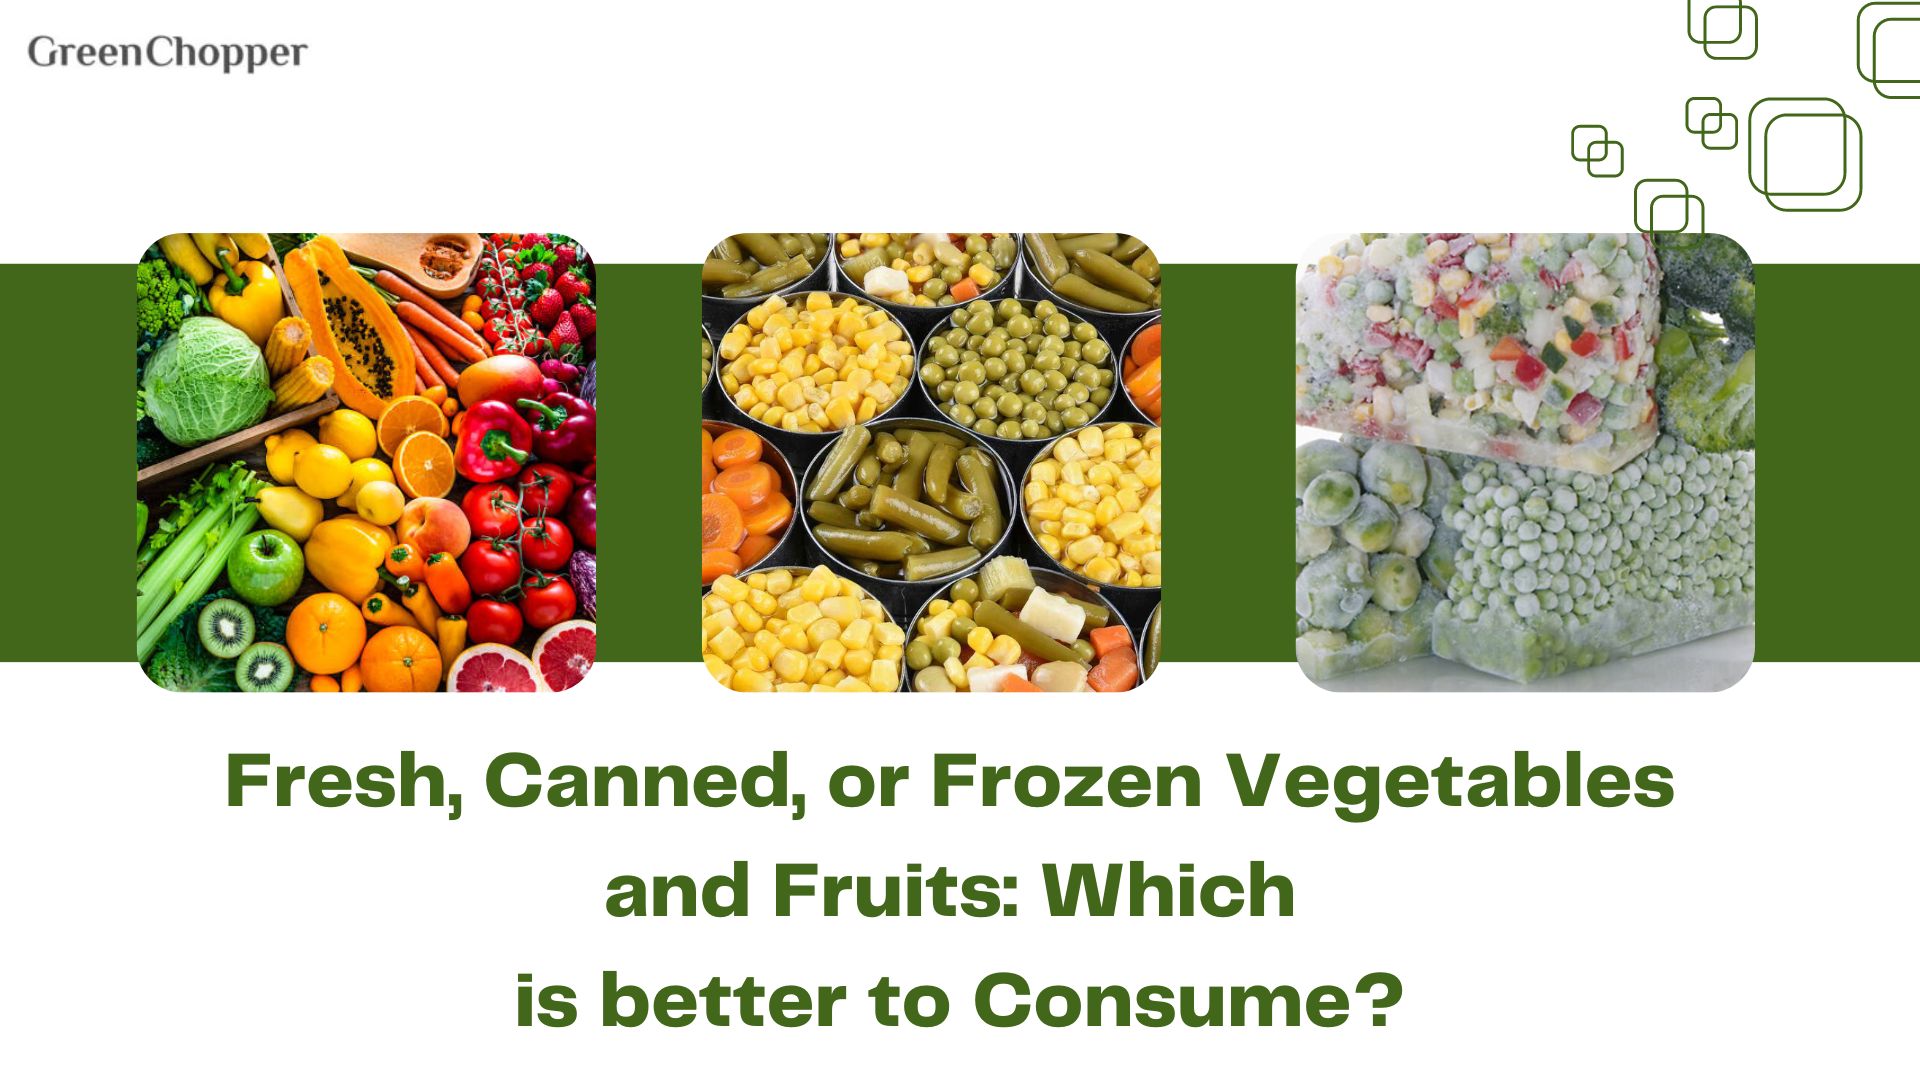 Fresh, Canned, or Frozen Vegetables and Fruits: Which is better to Consume?